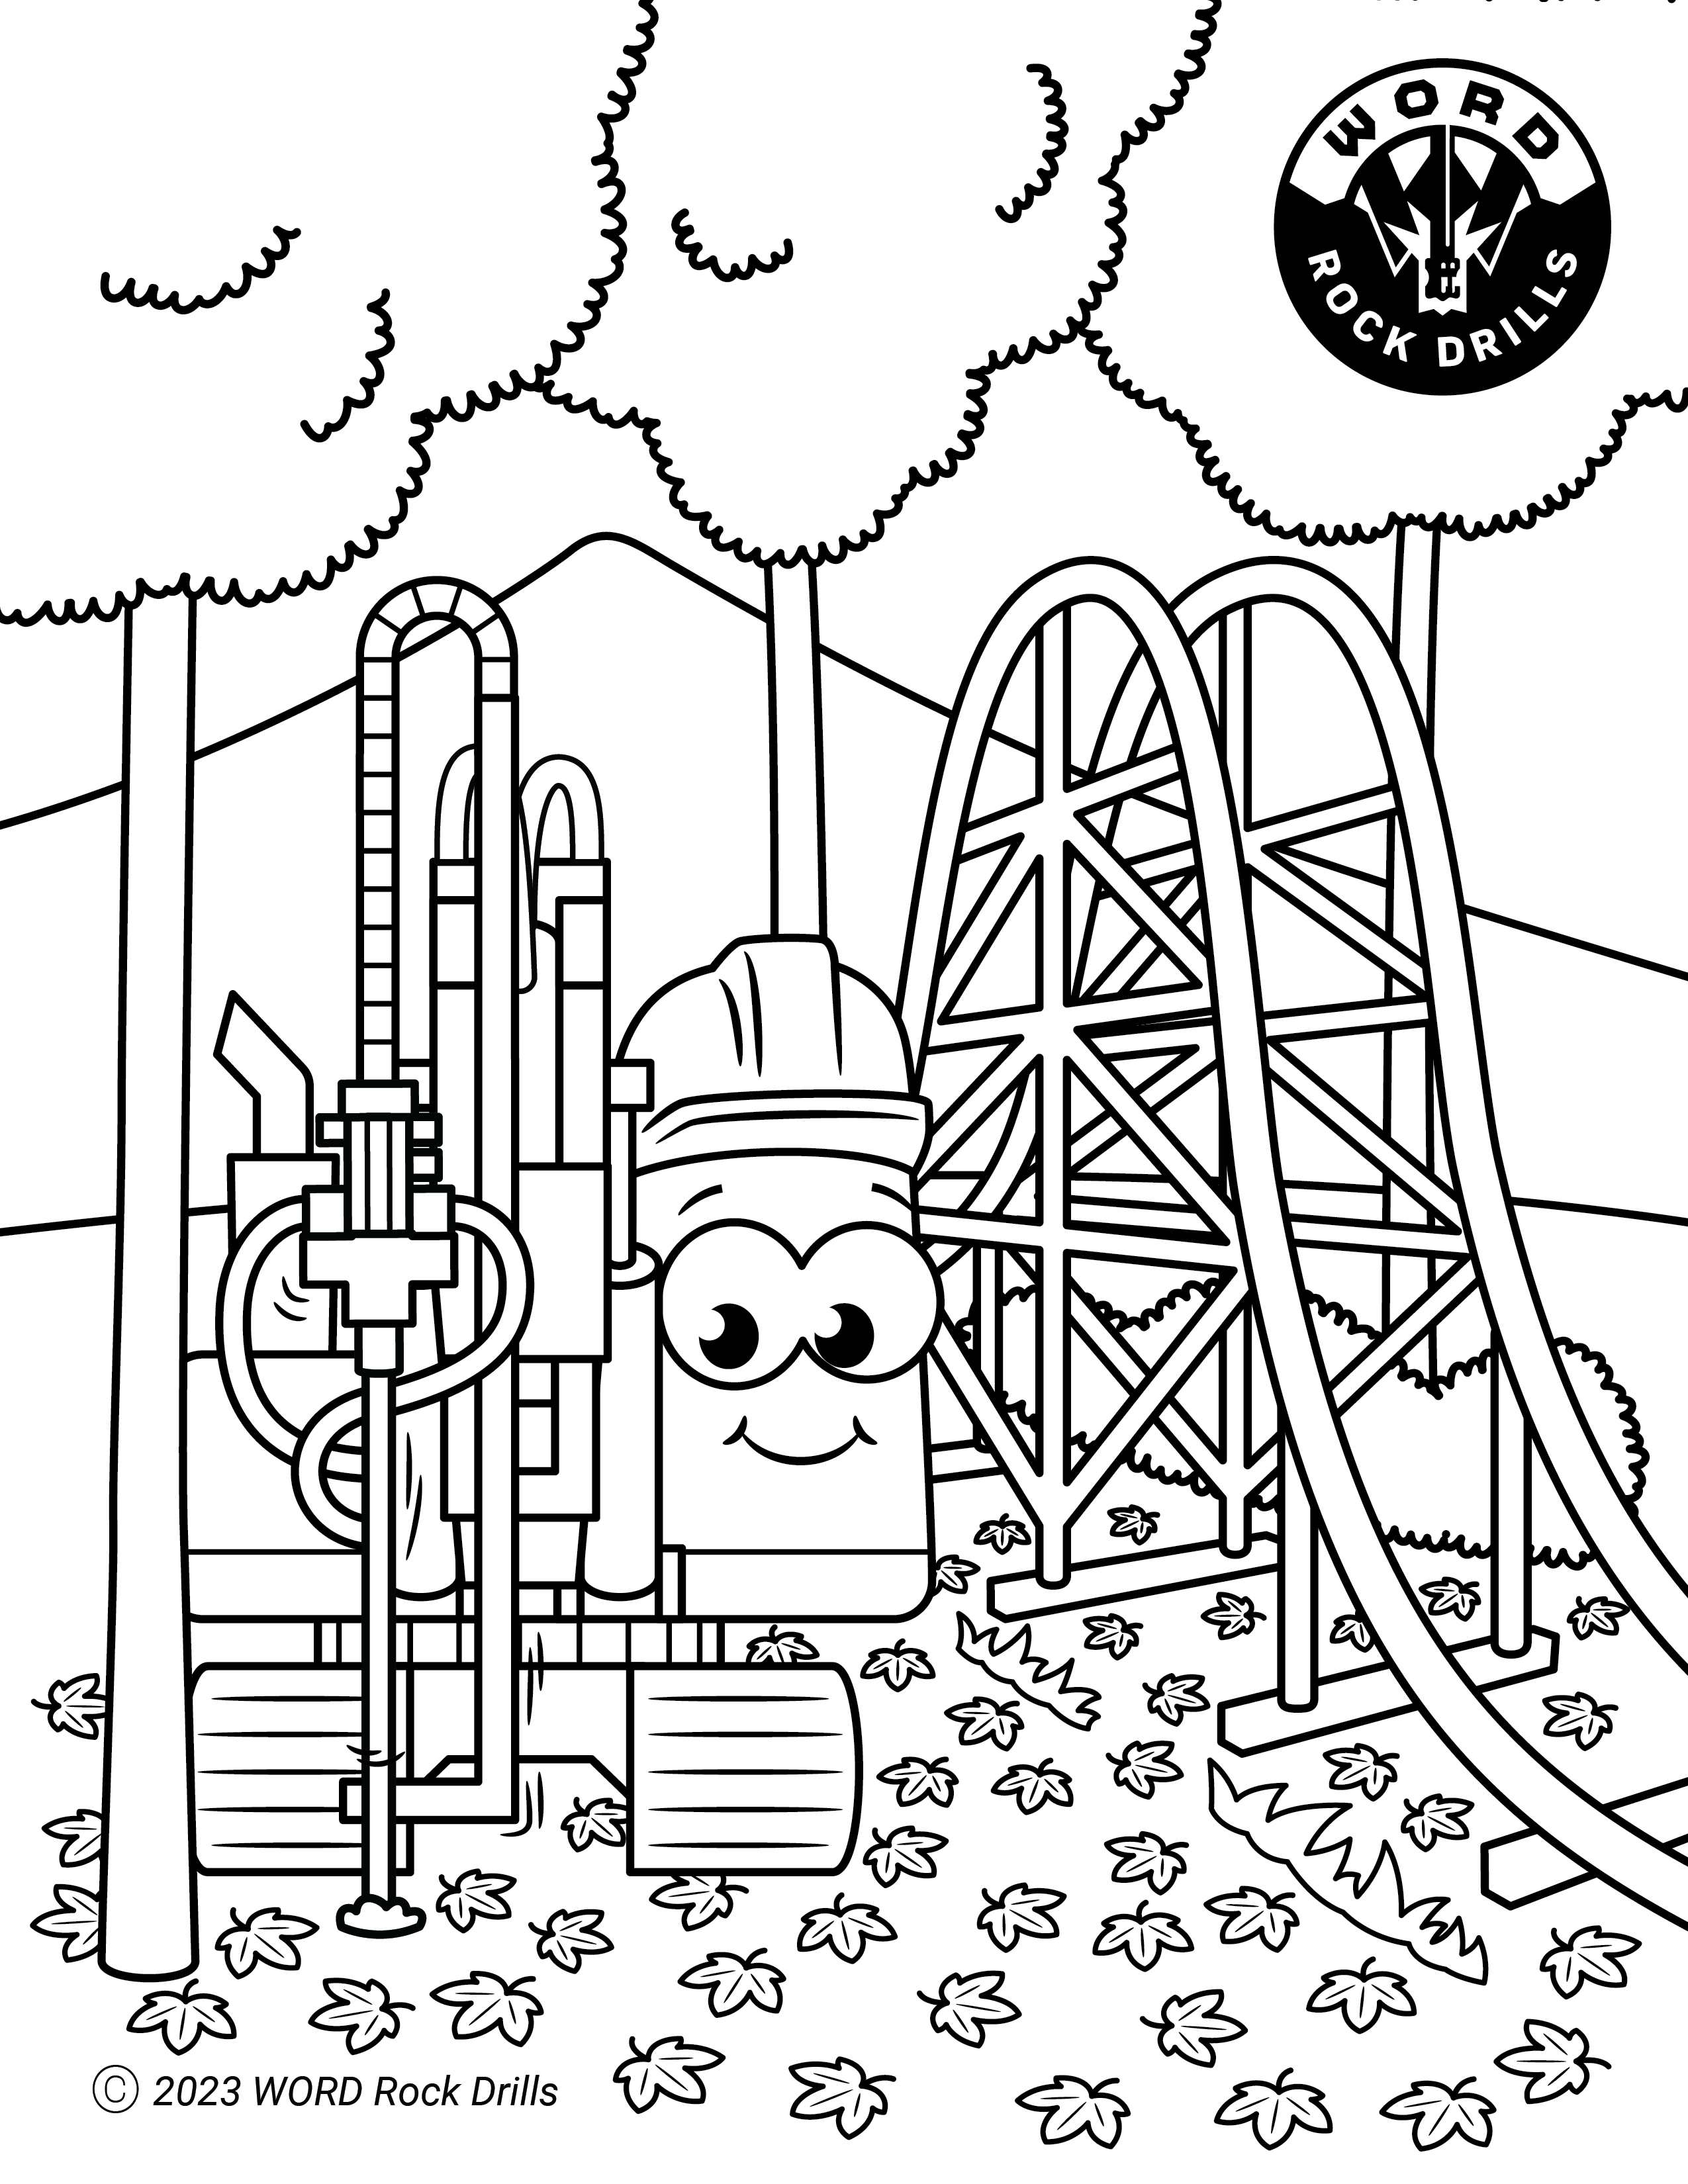 drill coloring pages